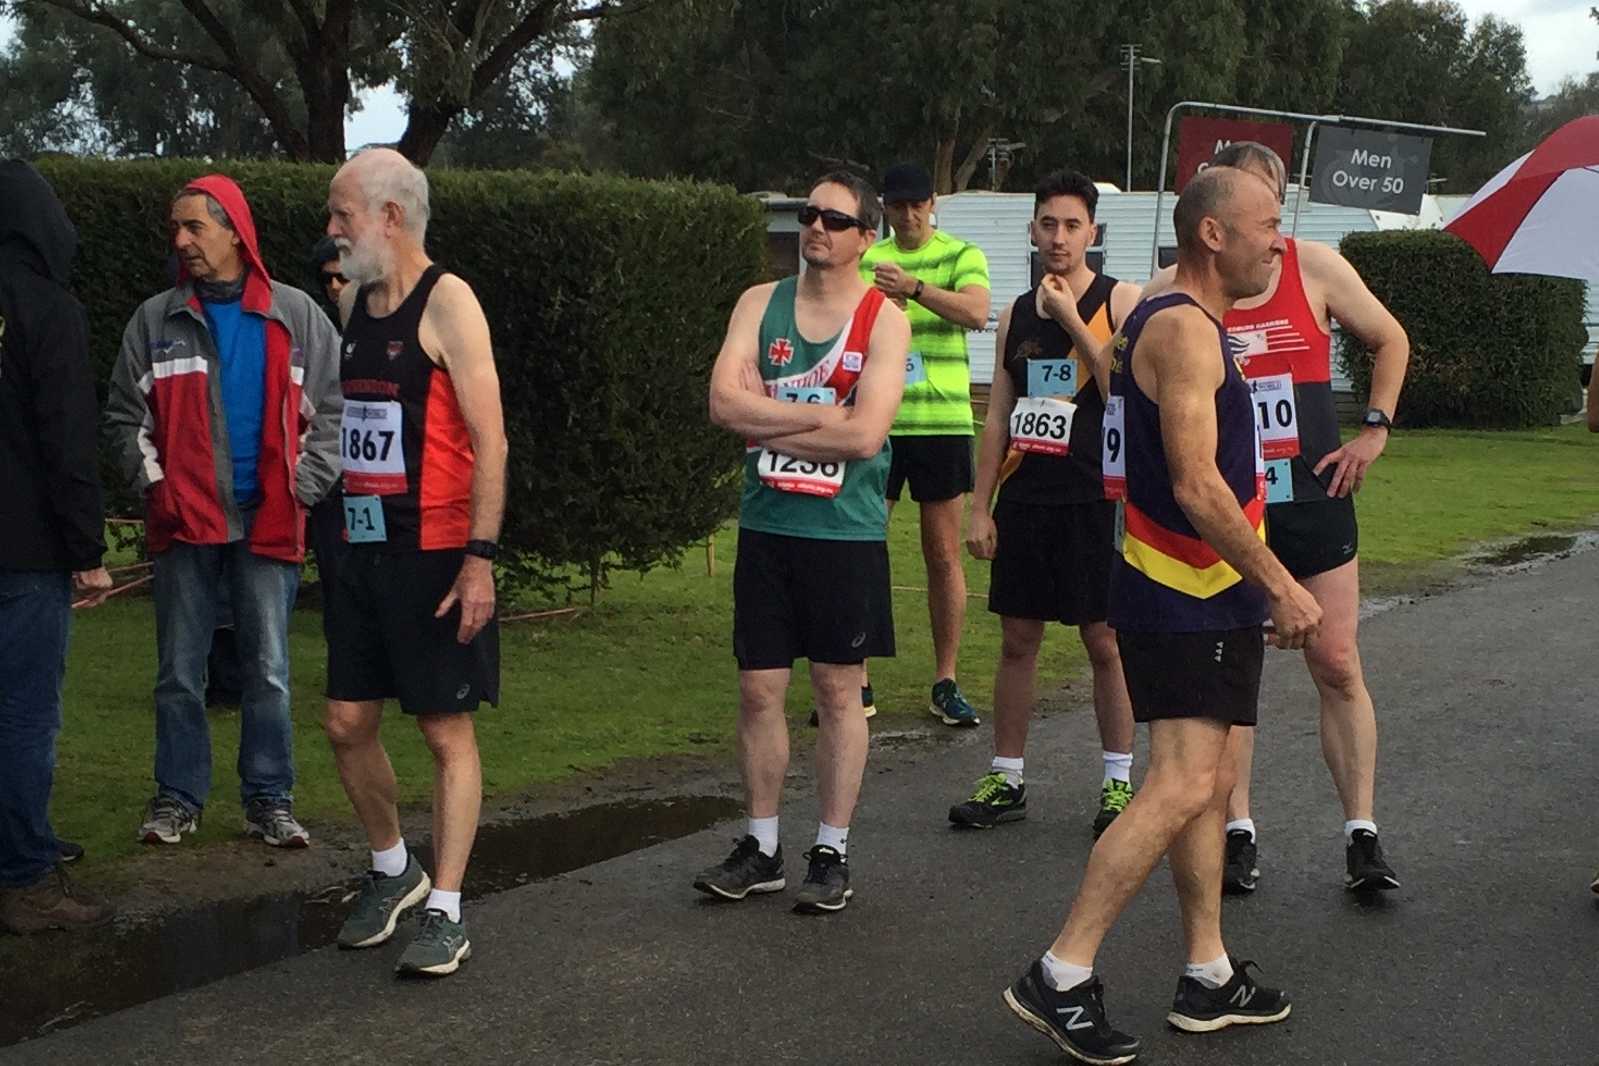 Chris looking relaxed at the Division 7 start line